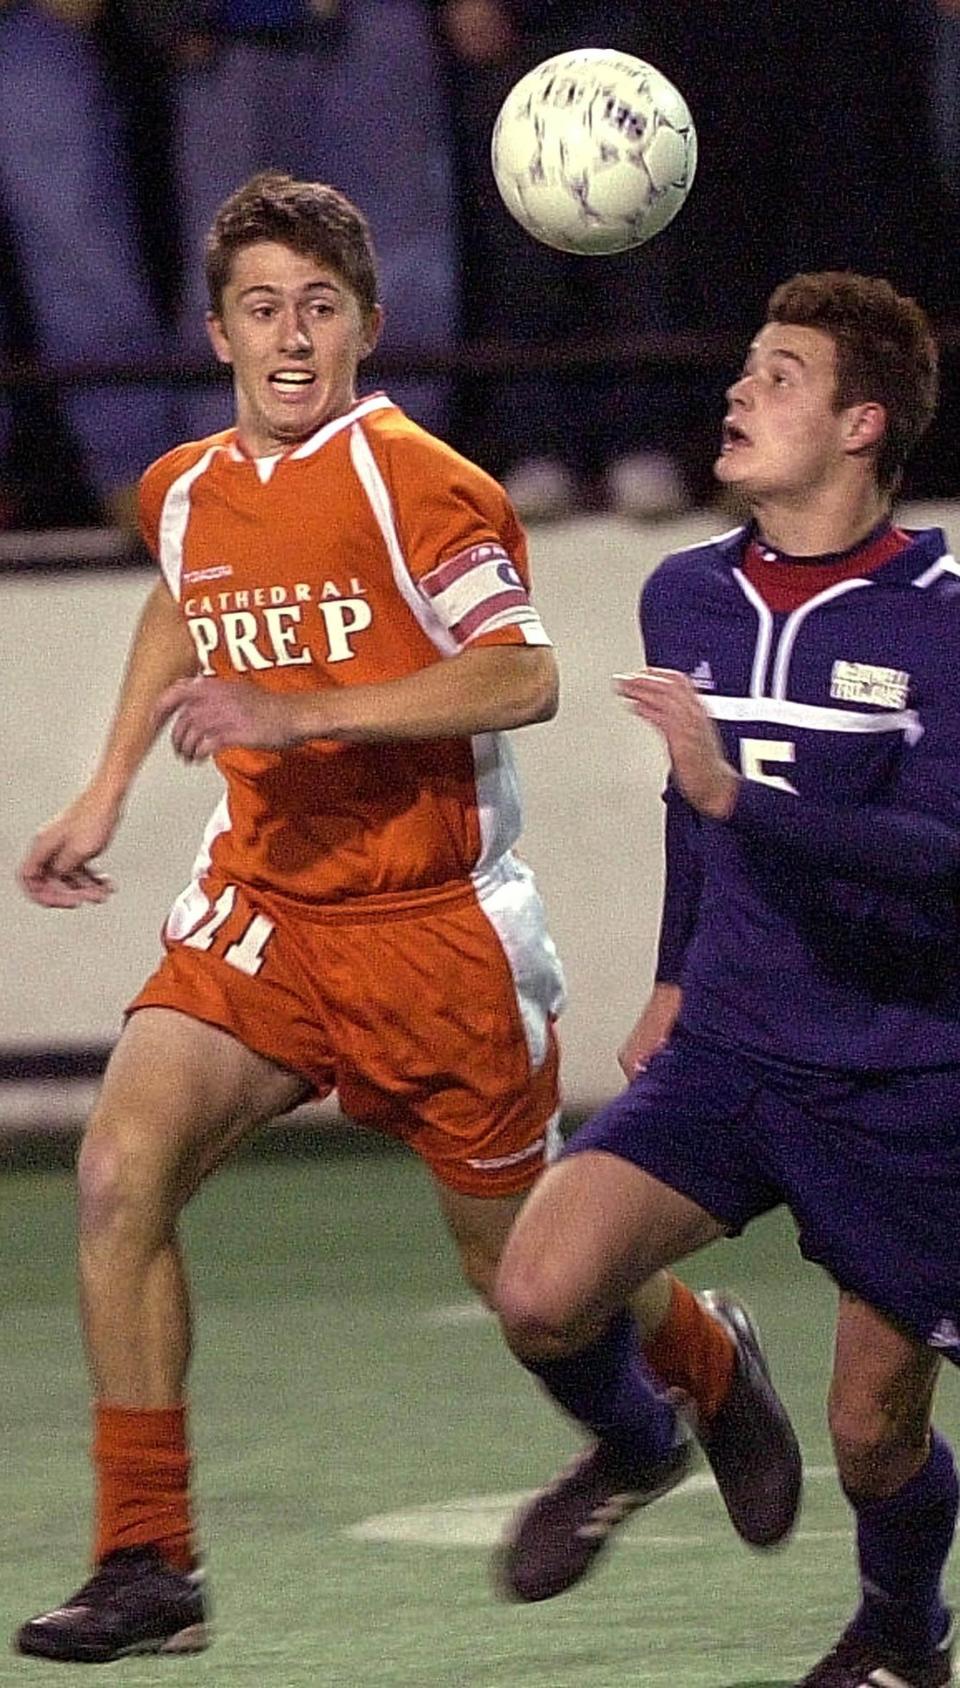 Jeff Hamley (left) was a member of the 2001 Cathedral Prep boys soccer team that shared the PIAA Class 3A tournament title with Strath Haven. The teams were declared co-champions when they couldn't resolve their 1-all tie after regulation play and multiple overtime periods.